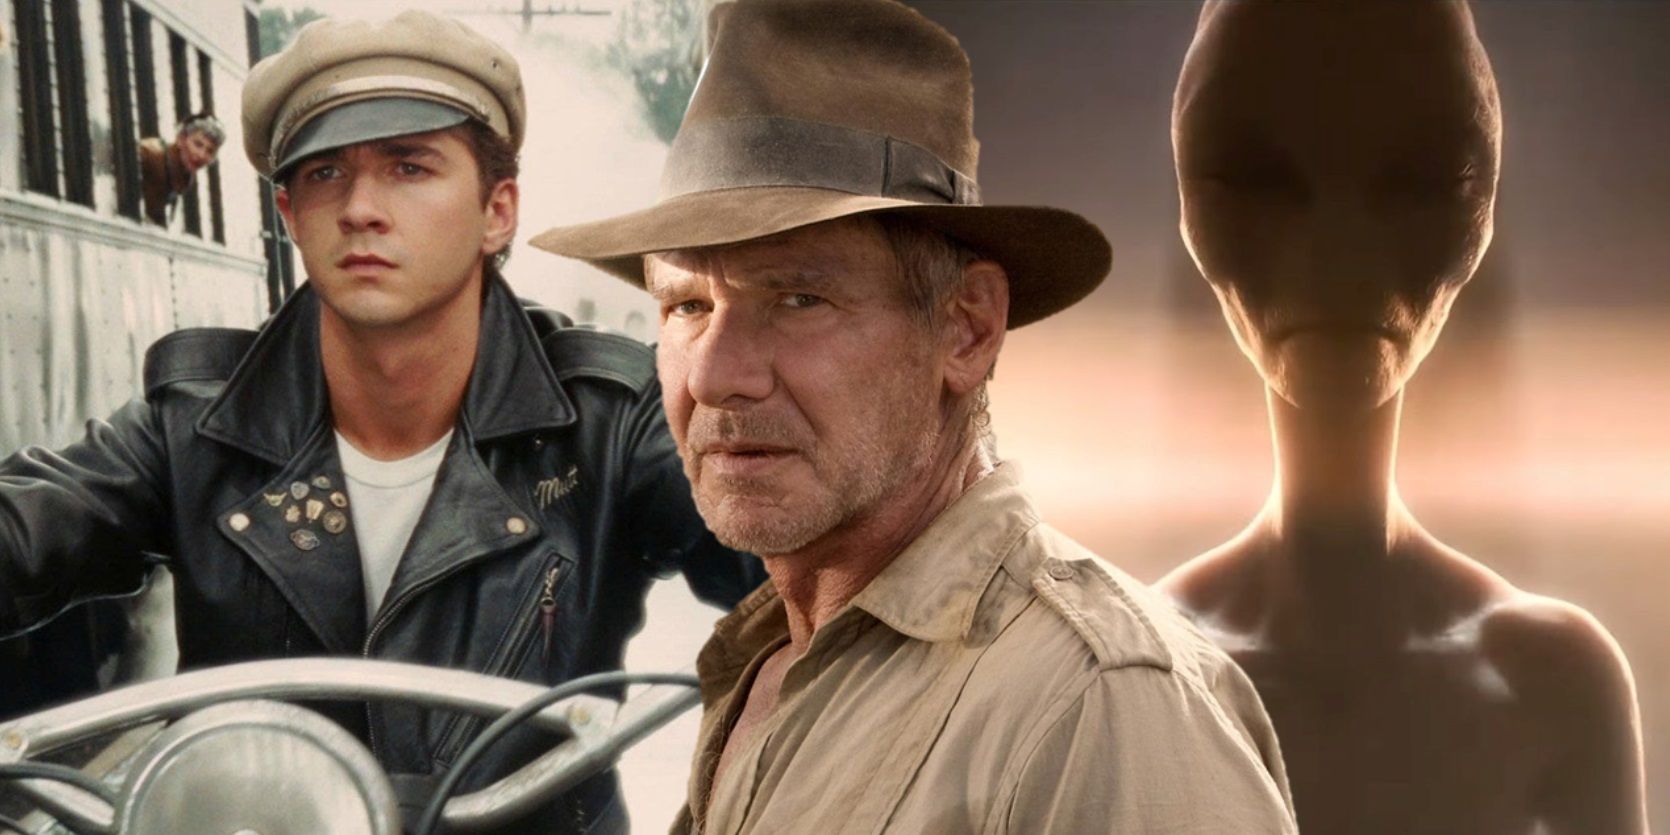 INDIANA JONES AND THE KINGDOM OF THE CRYSTAL SKULLS” (2008) Review